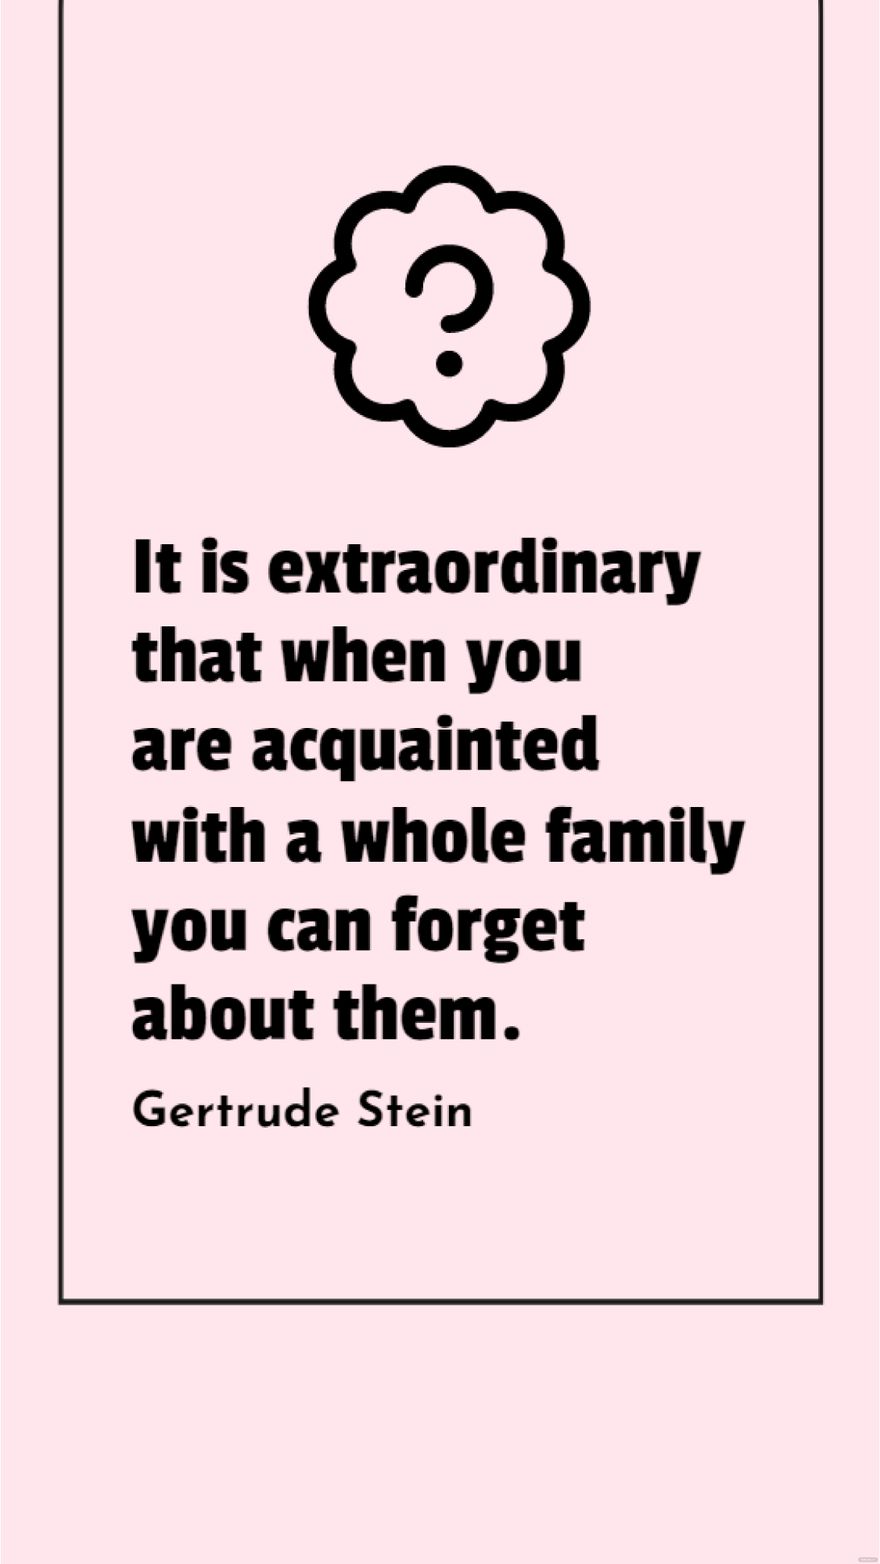 Gertrude Stein - It is extraordinary that when you are acquainted with a whole family you can forget about them. in JPG